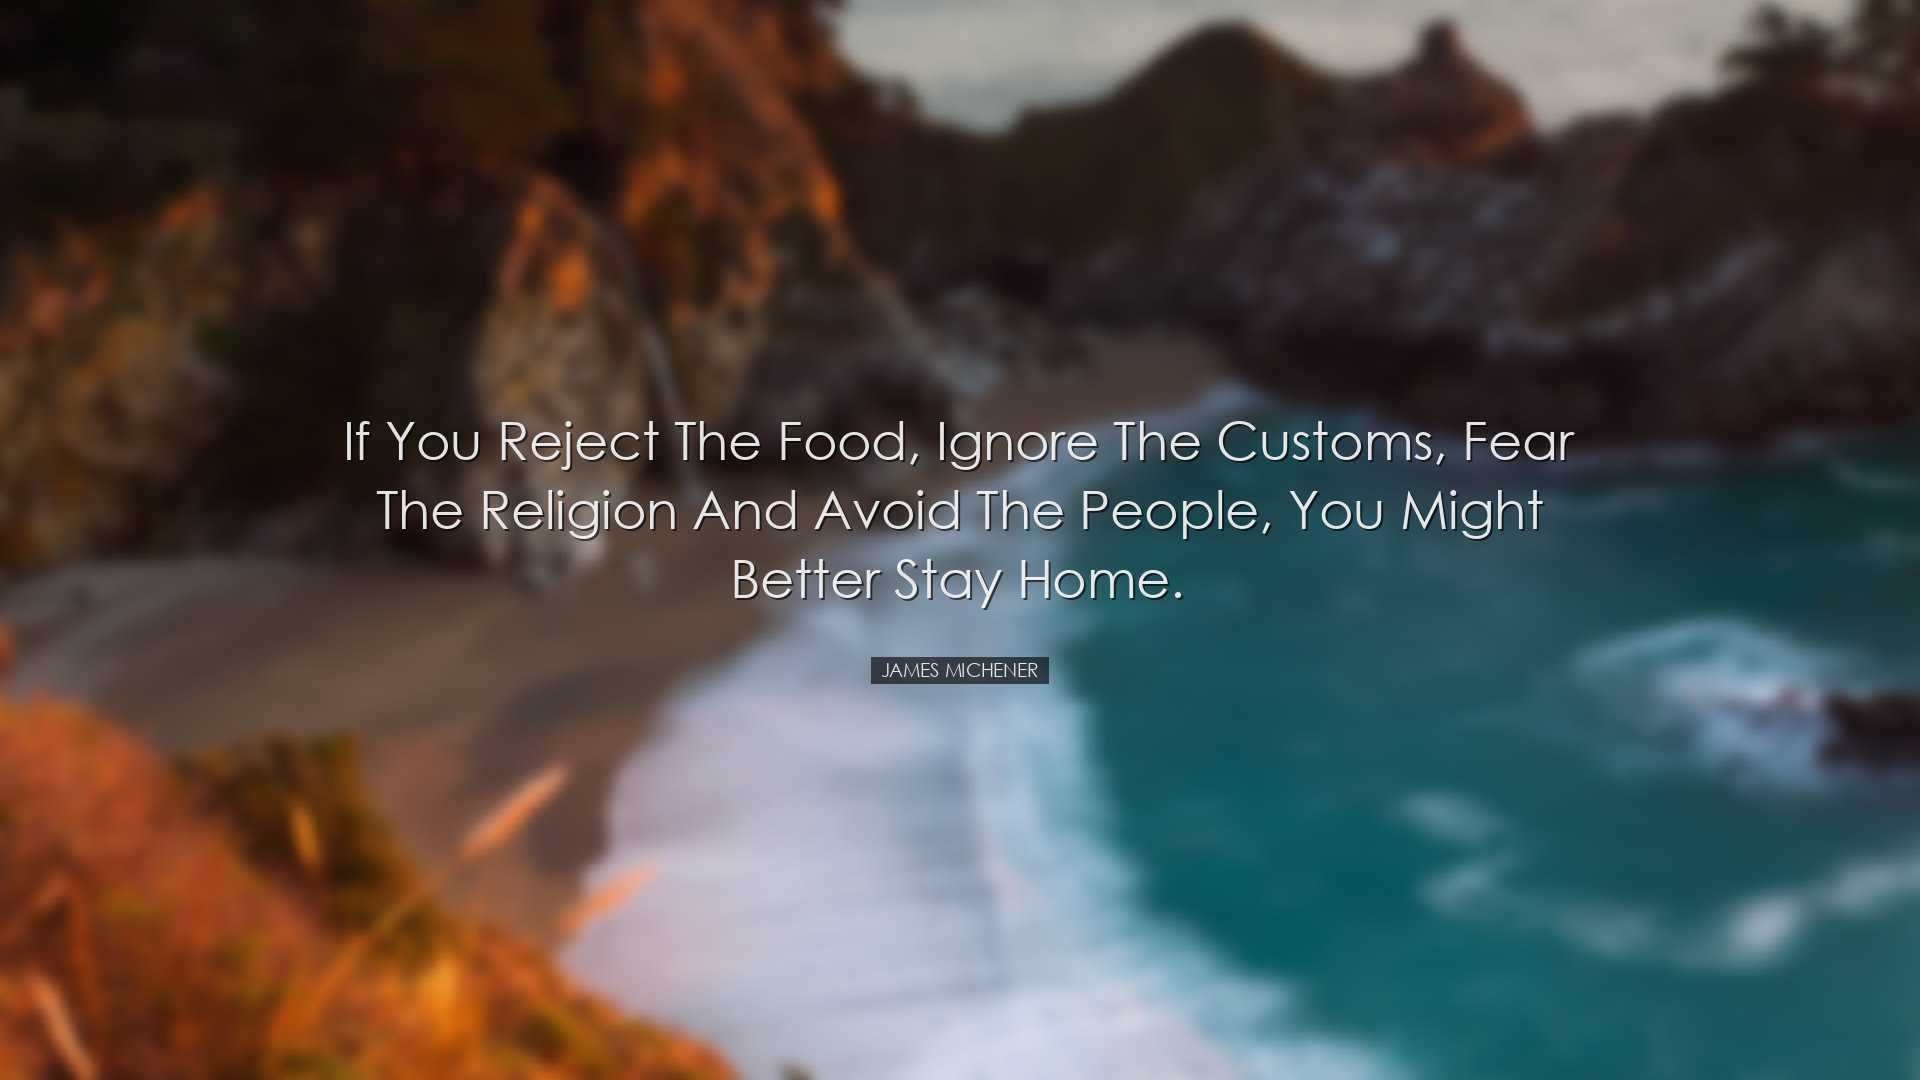 If you reject the food, ignore the customs, fear the religion and